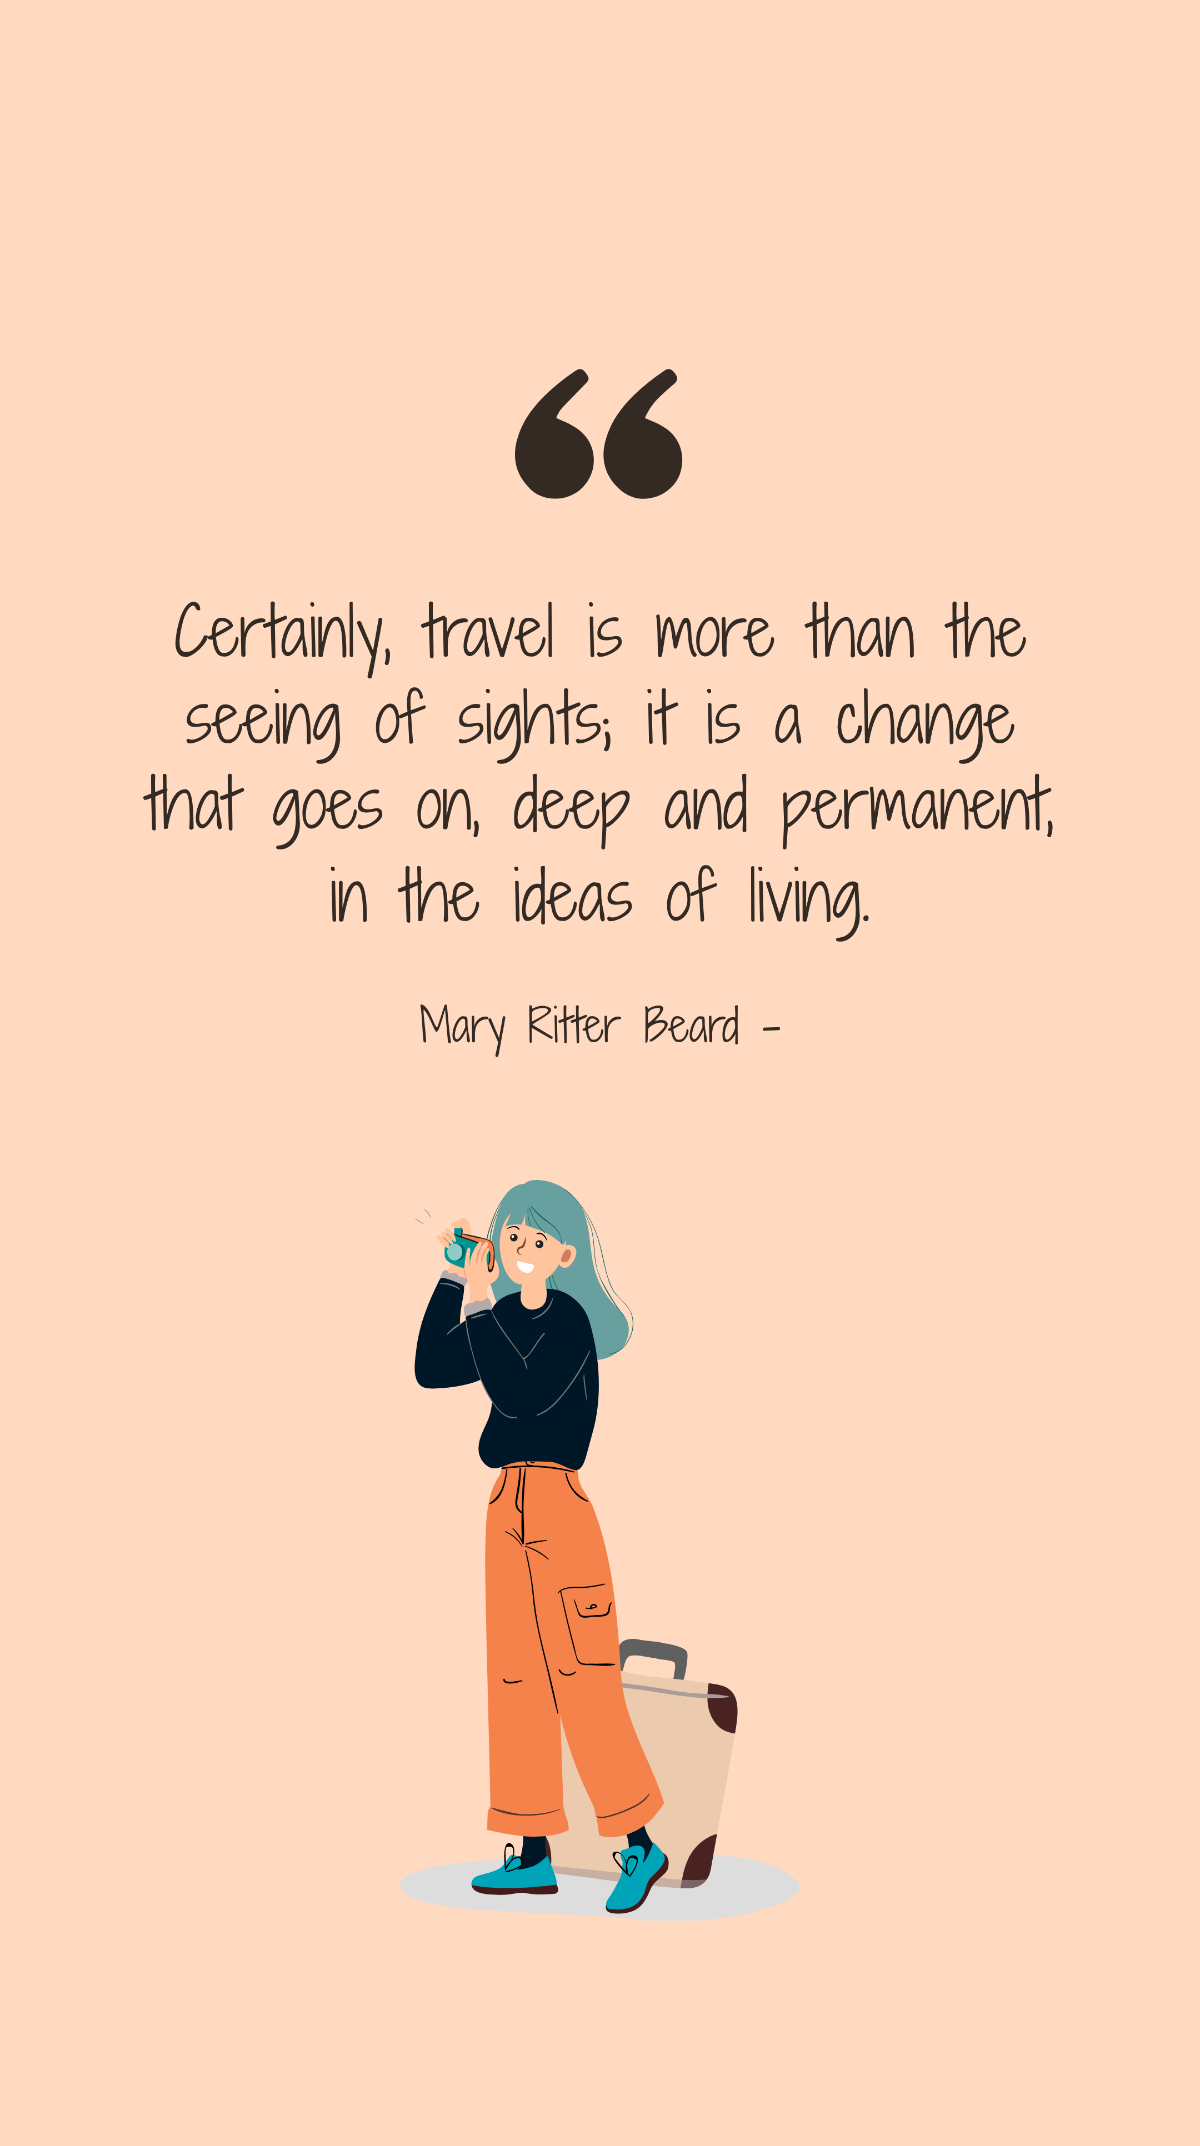 Free Mary Ritter Beard - Certainly, travel is more than the seeing of sights; it is a change that goes on, deep and permanent, in the ideas of living. Template